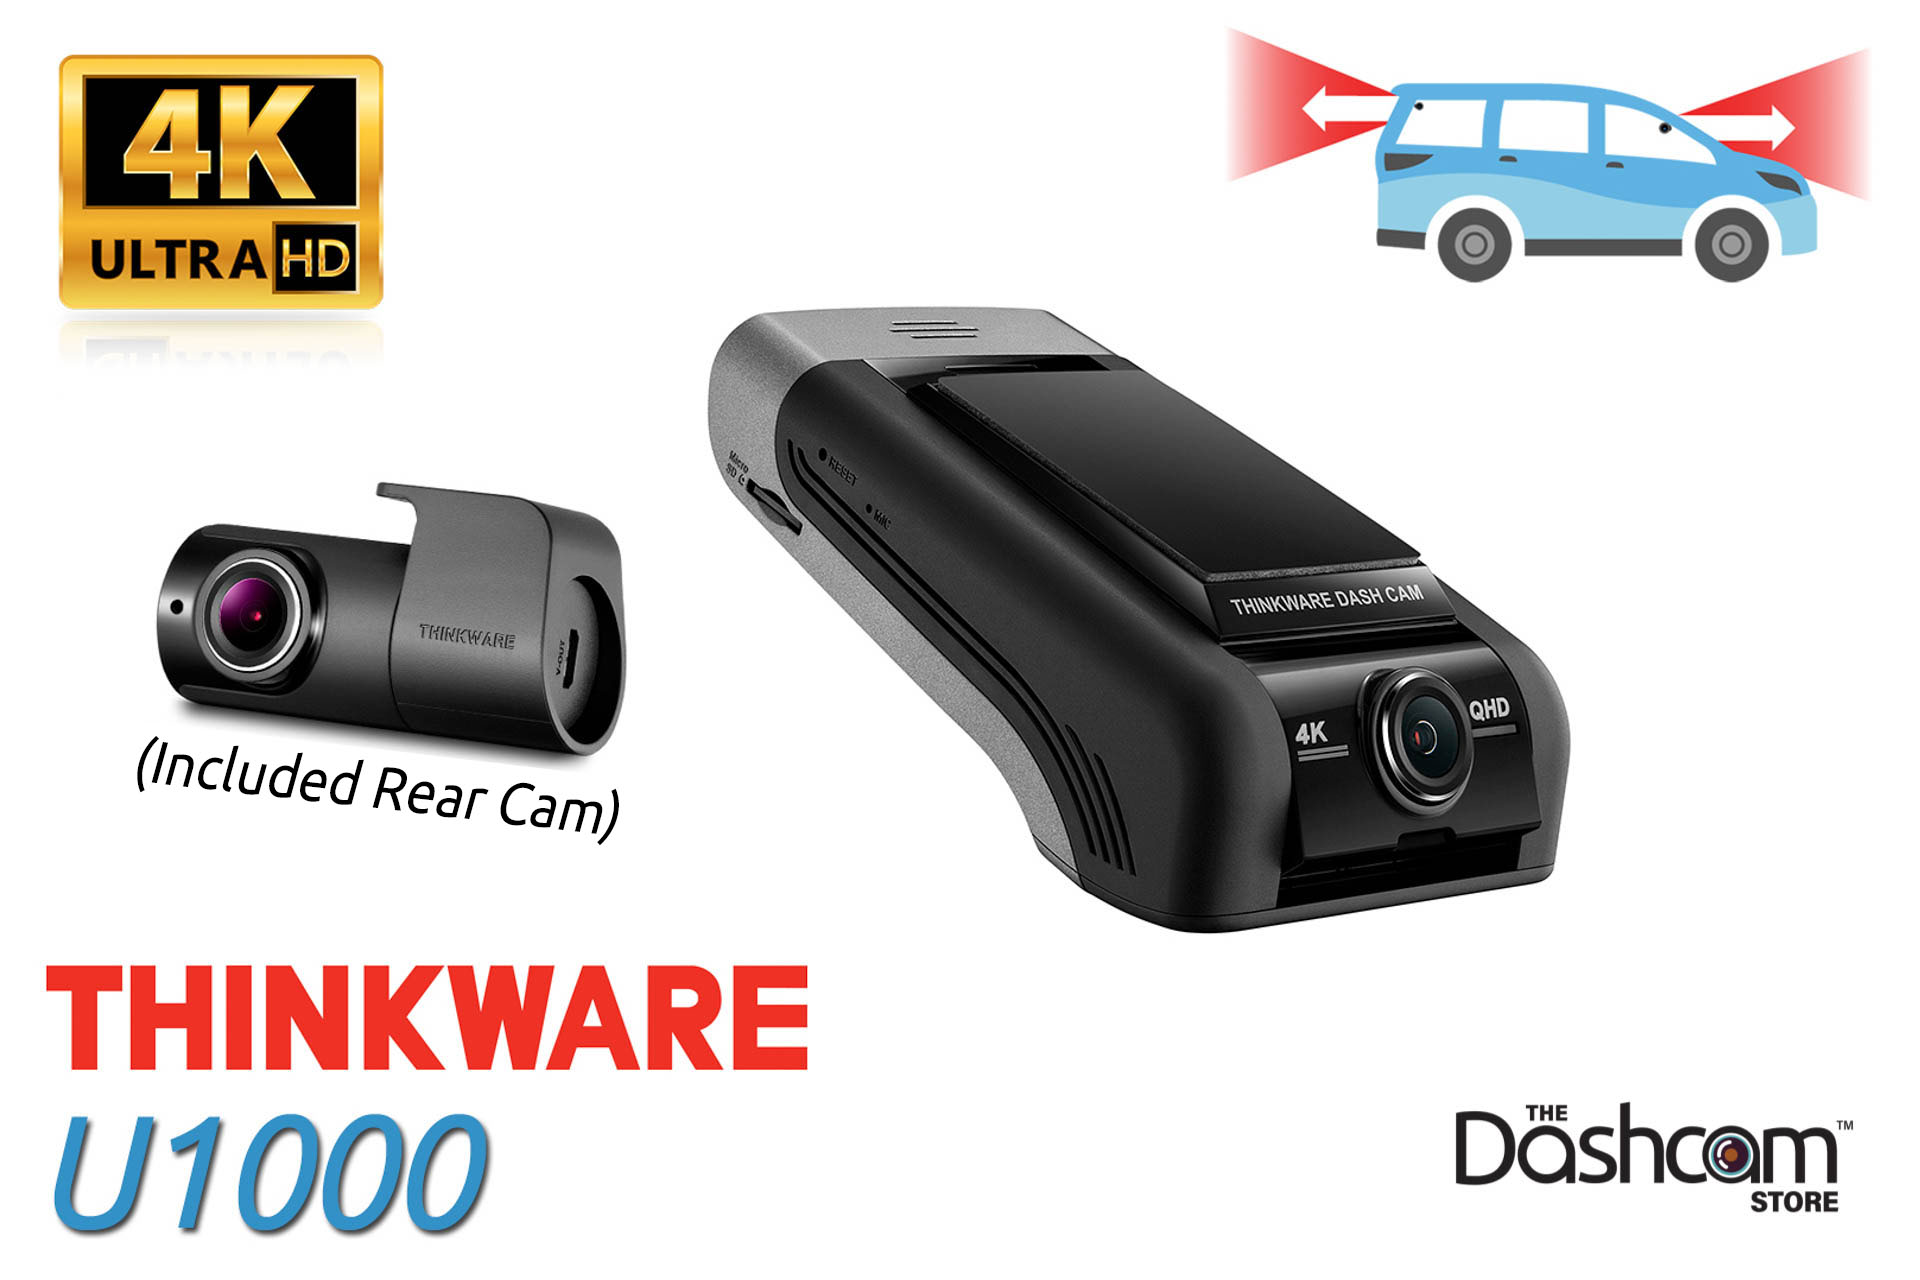 Dashboard Camera With GPS tracker-Car Security Camera System-2K Front&Rear  Dashcam With WIFI